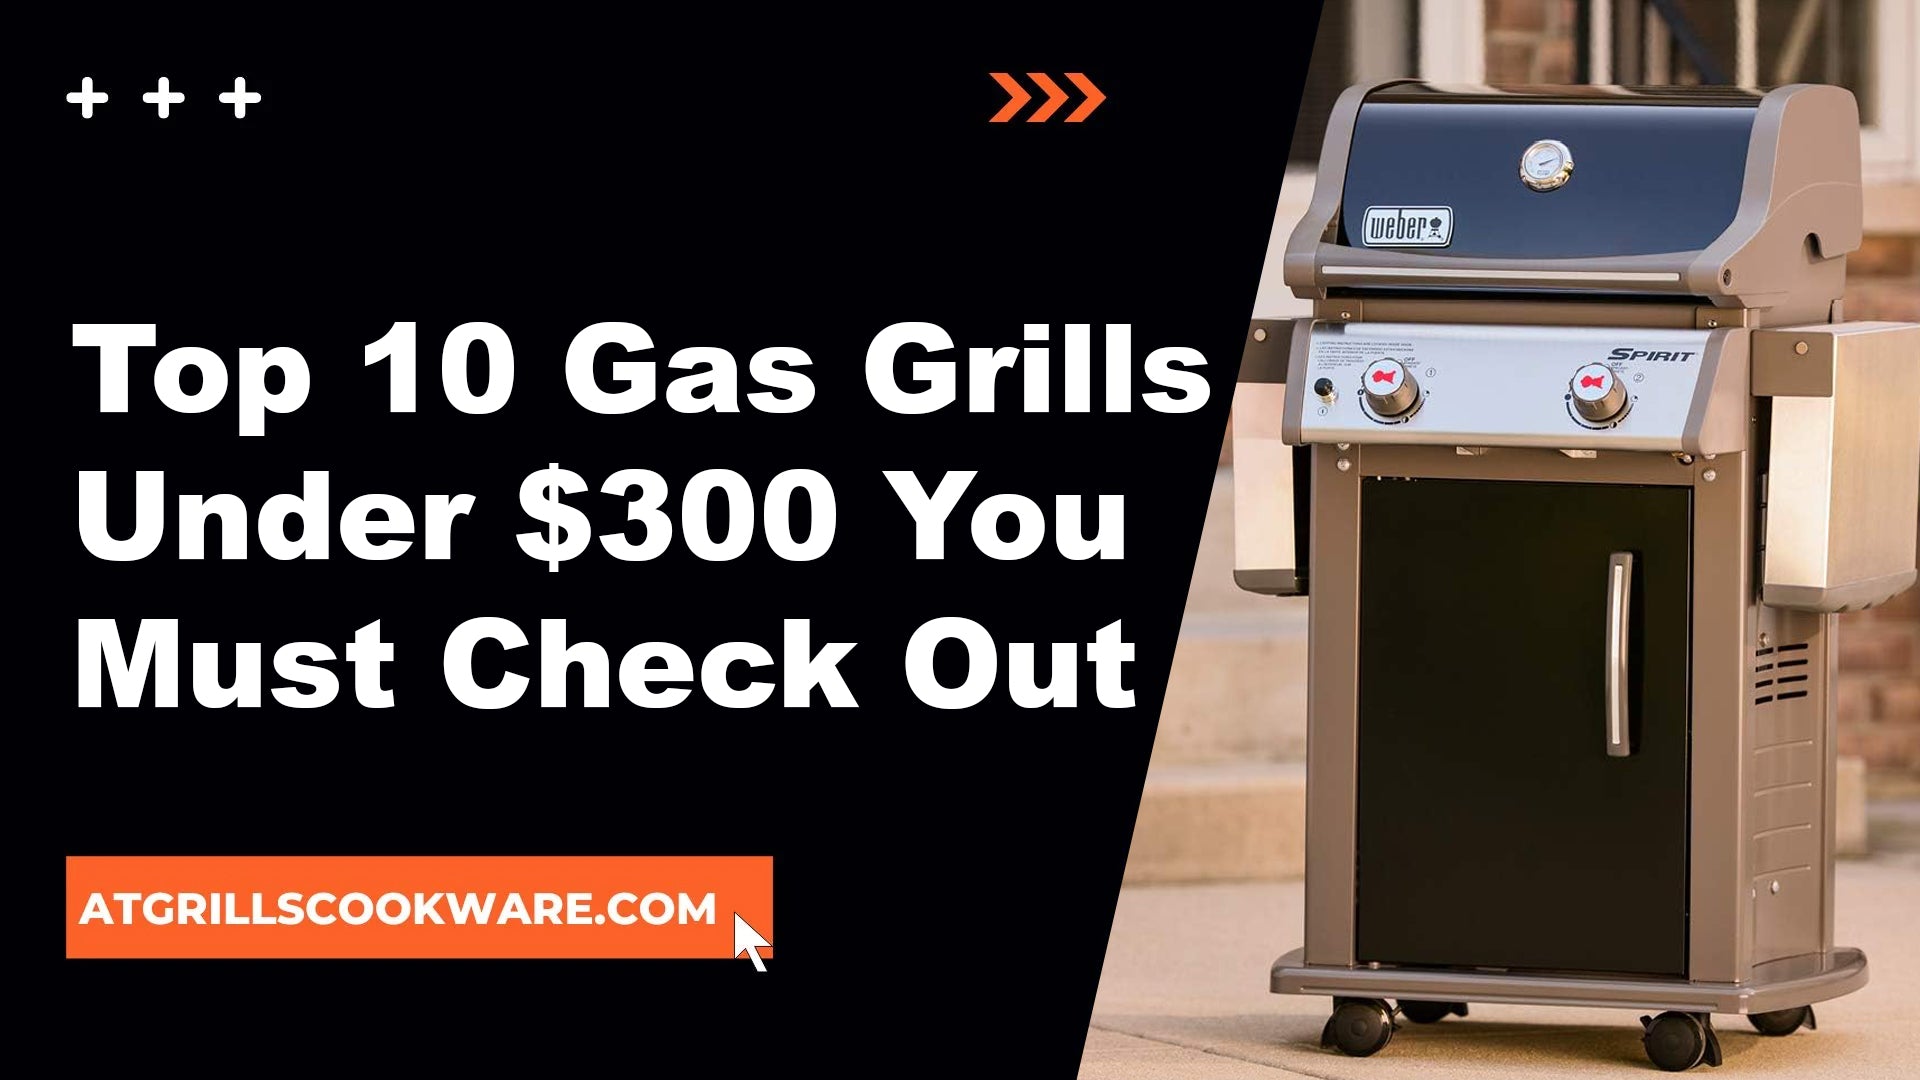 Top 10 Gas Grills Under $300 You Must Check Out